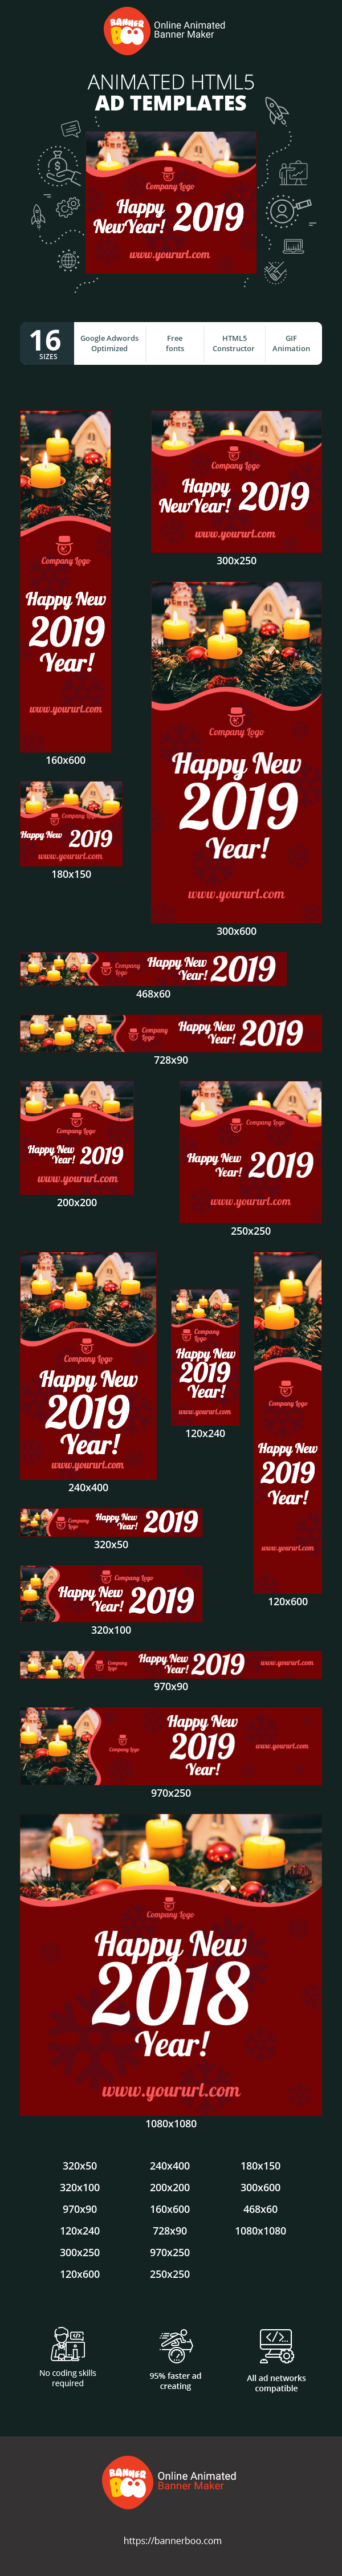 Banner ad template — Happy New 2020 Year!